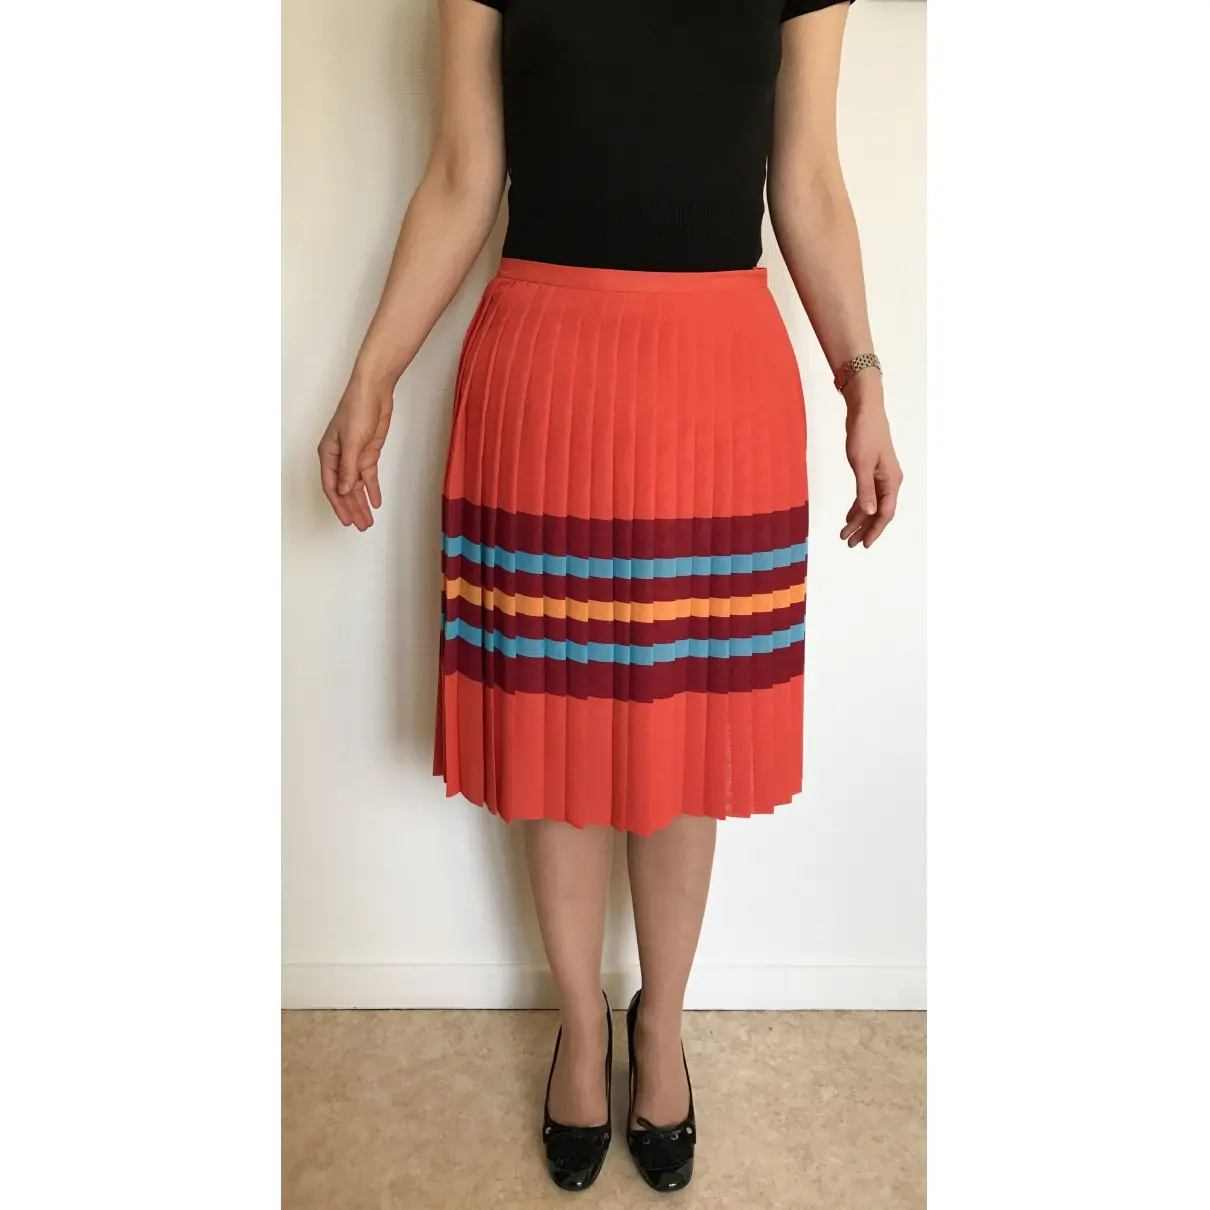 Hilfiger Collection Mid-length skirt for sale